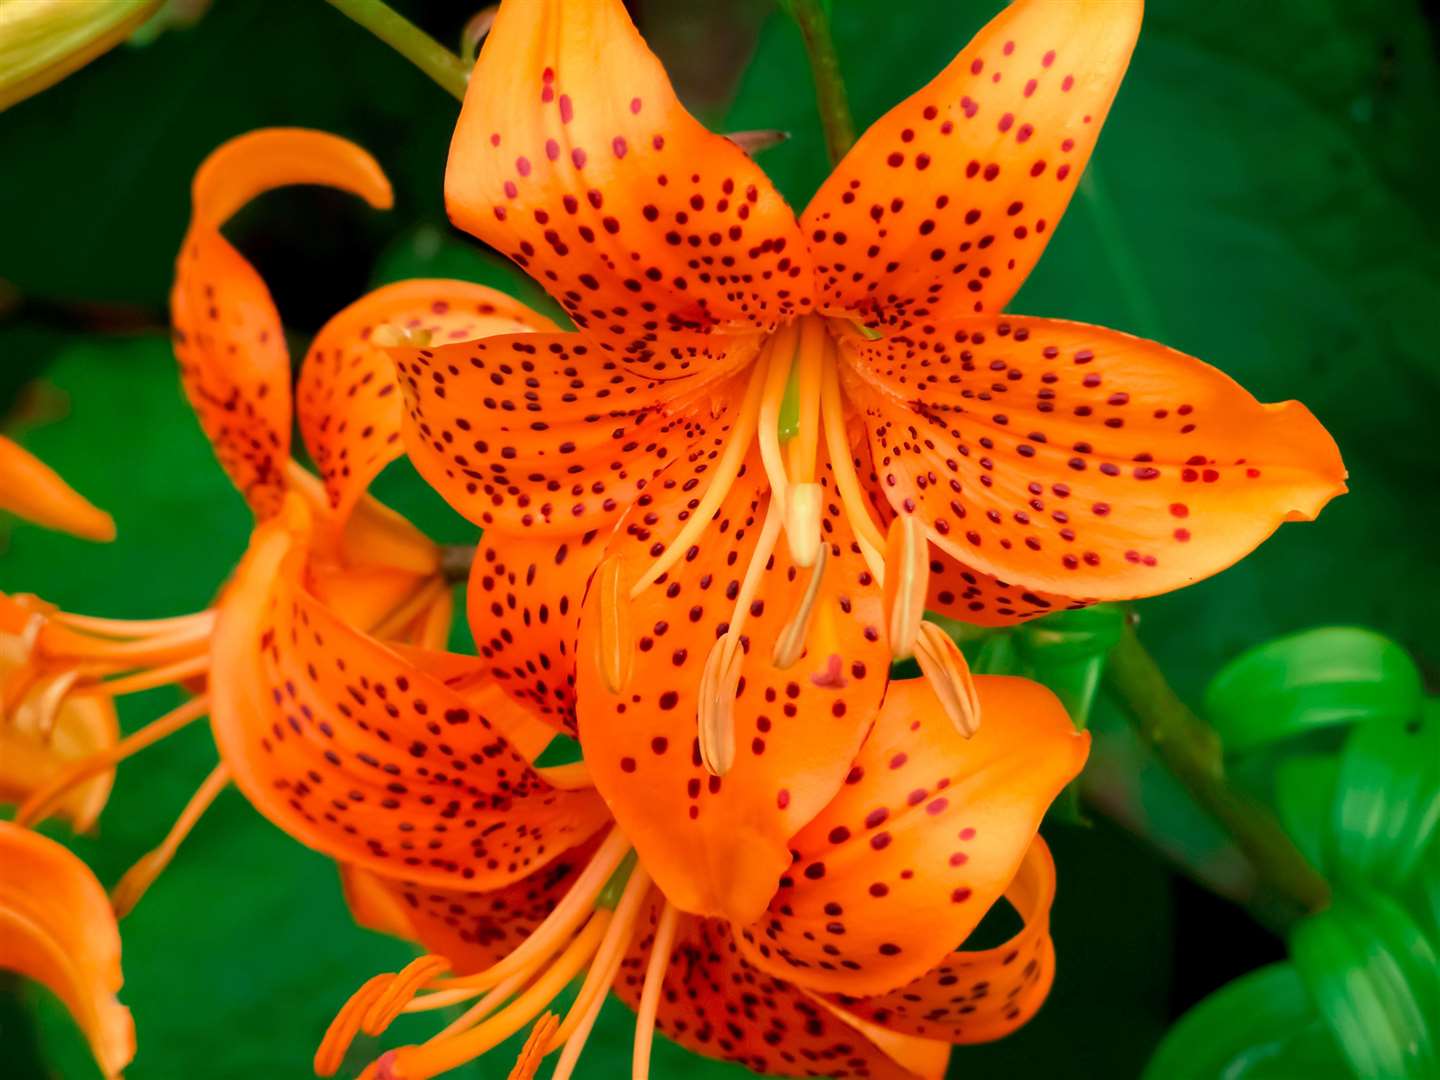 Tiger lily, one of the easiest to grow.